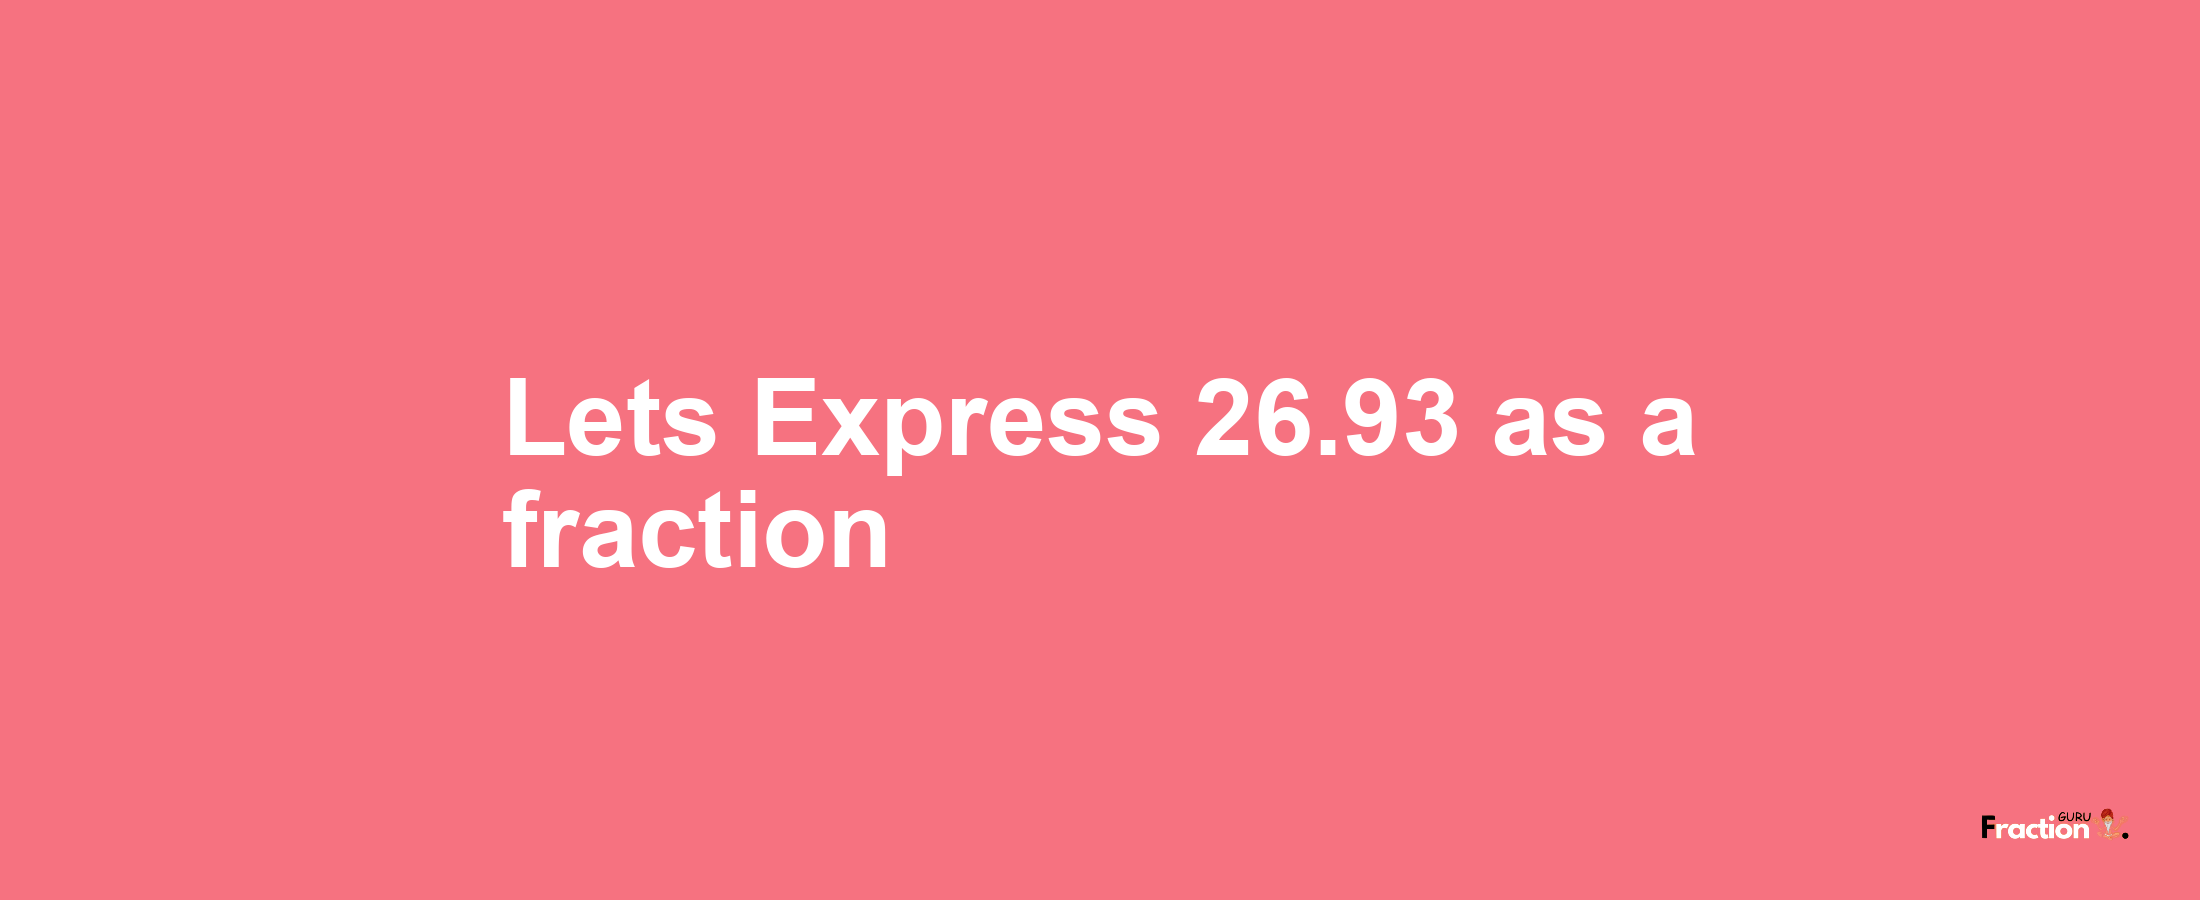 Lets Express 26.93 as afraction